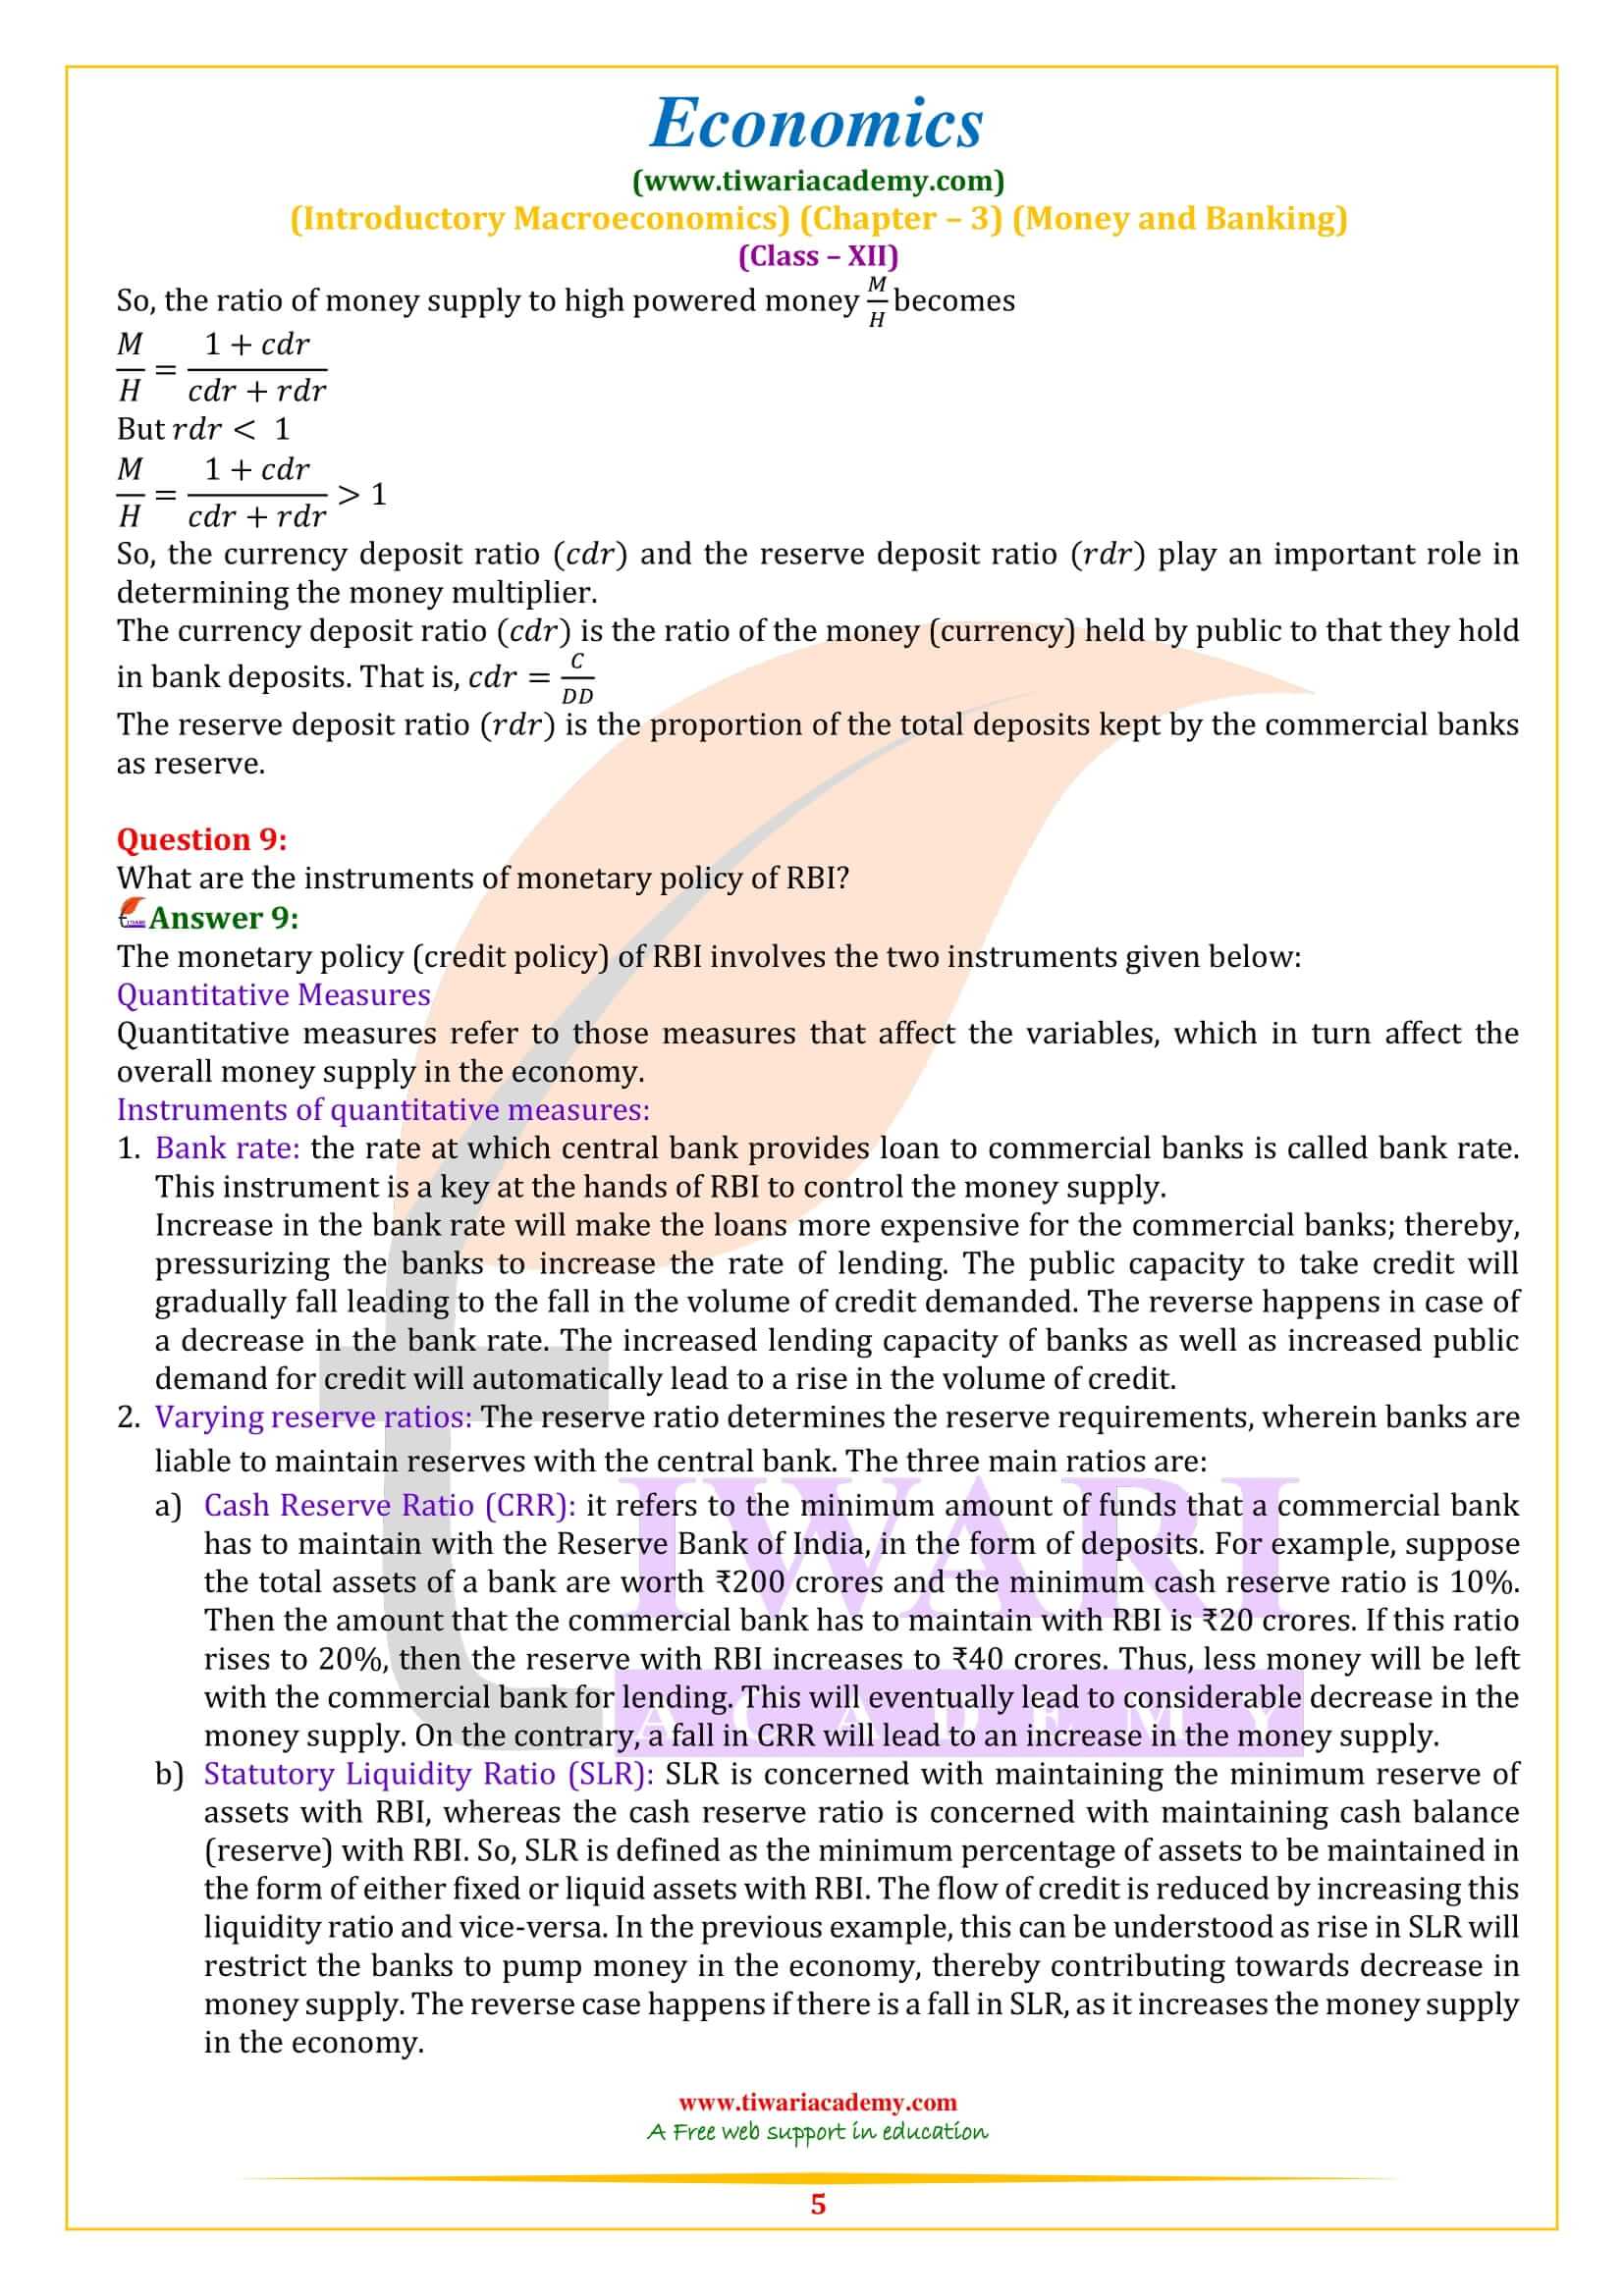 NCERT Solutions for Class 12 Economics Chapter 3 answers guide